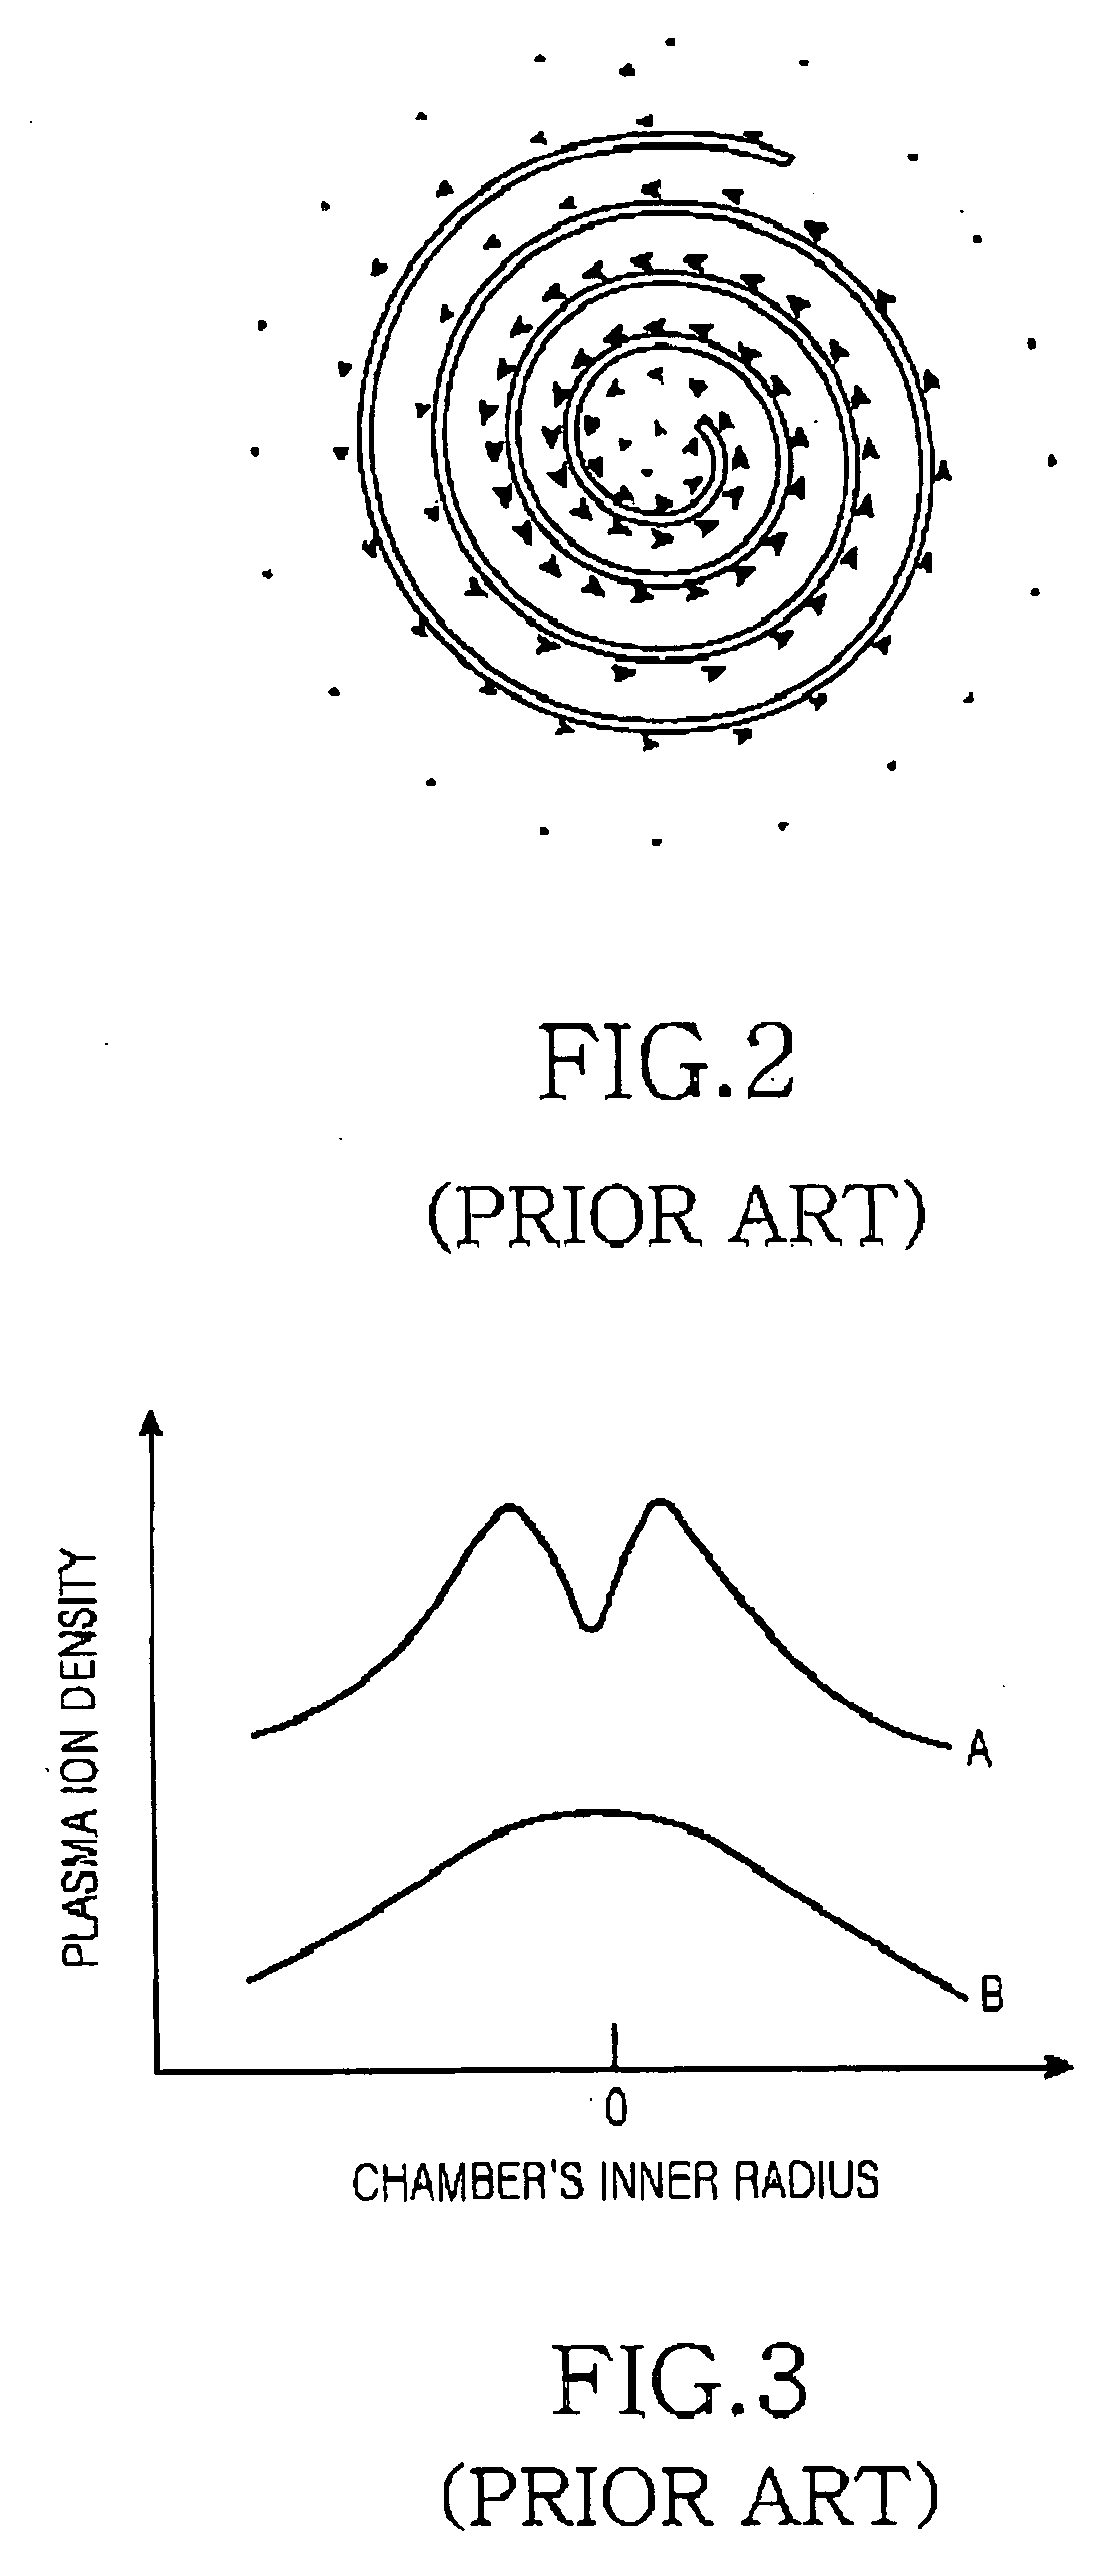 Apparatus for generating inductively-coupled plasma and antenna coil structure thereof for generating inductive electric fields